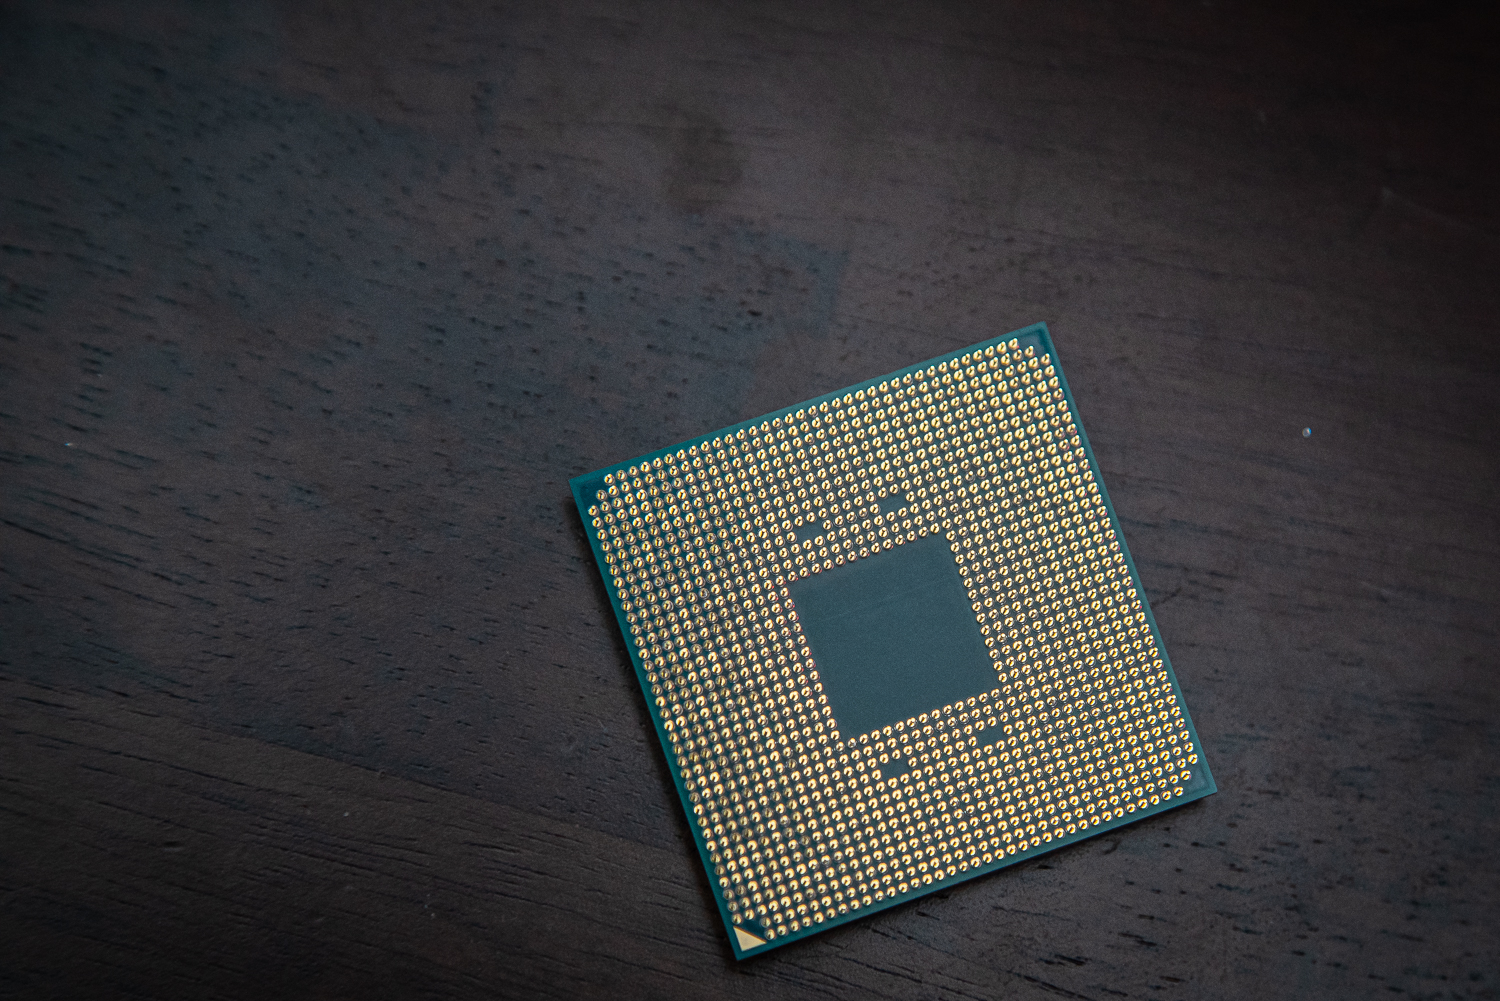 The AMD Ryzen 7 5800X3D Review: 96 MB of L3 3D V-Cache Designed For Gamers